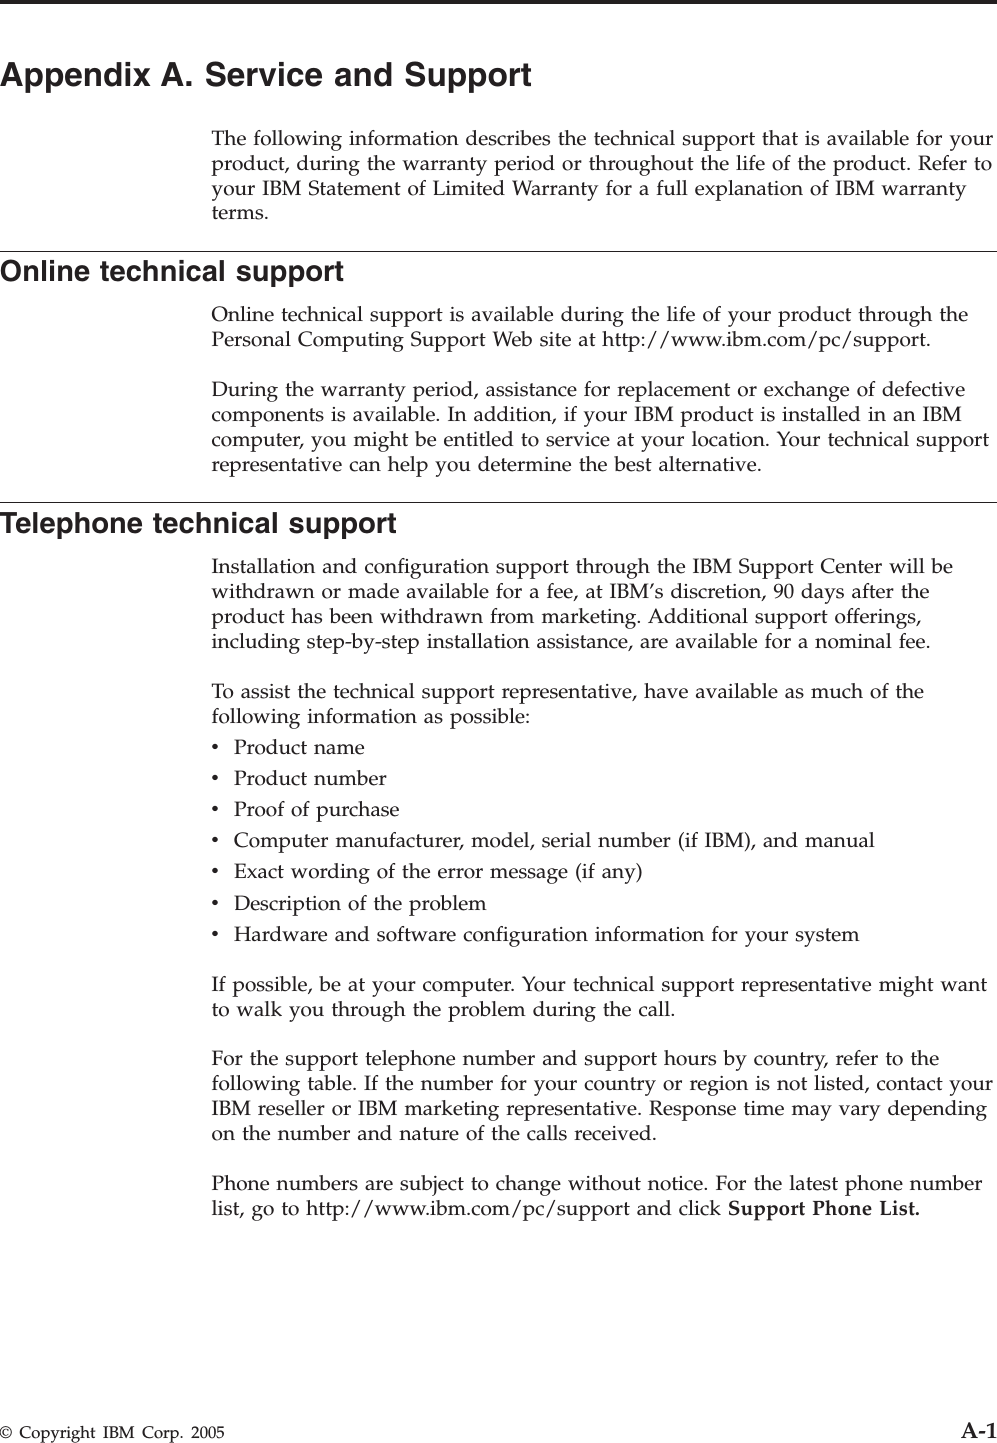 Appendix A. Service and Support The following information describes the technical support that is available for your product, during the warranty period or throughout the life of the product. Refer to your IBM Statement of Limited Warranty for a full explanation of IBM warranty terms. Online technical support Online technical support is available during the life of your product through the Personal Computing Support Web site at http://www.ibm.com/pc/support. During the warranty period, assistance for replacement or exchange of defective components is available. In addition, if your IBM product is installed in an IBM computer, you might be entitled to service at your location. Your technical support representative can help you determine the best alternative. Telephone technical support Installation and configuration support through the IBM Support Center will be withdrawn or made available for a fee, at IBM’s discretion, 90 days after the product has been withdrawn from marketing. Additional support offerings, including step-by-step installation assistance, are available for a nominal fee. To assist the technical support representative, have available as much of the following information as possible: v    Product name v    Product number v    Proof of purchase v    Computer manufacturer, model, serial number (if IBM), and manual v    Exact wording of the error message (if any) v    Description of the problem v    Hardware and software configuration information for your systemIf possible, be at your computer. Your technical support representative might want to walk you through the problem during the call. For the support telephone number and support hours by country, refer to the following table. If the number for your country or region is not listed, contact your IBM reseller or IBM marketing representative. Response time may vary depending on the number and nature of the calls received. Phone numbers are subject to change without notice. For the latest phone number list, go to http://www.ibm.com/pc/support and click Support Phone List.  © Copyright IBM Corp. 2005 A-1